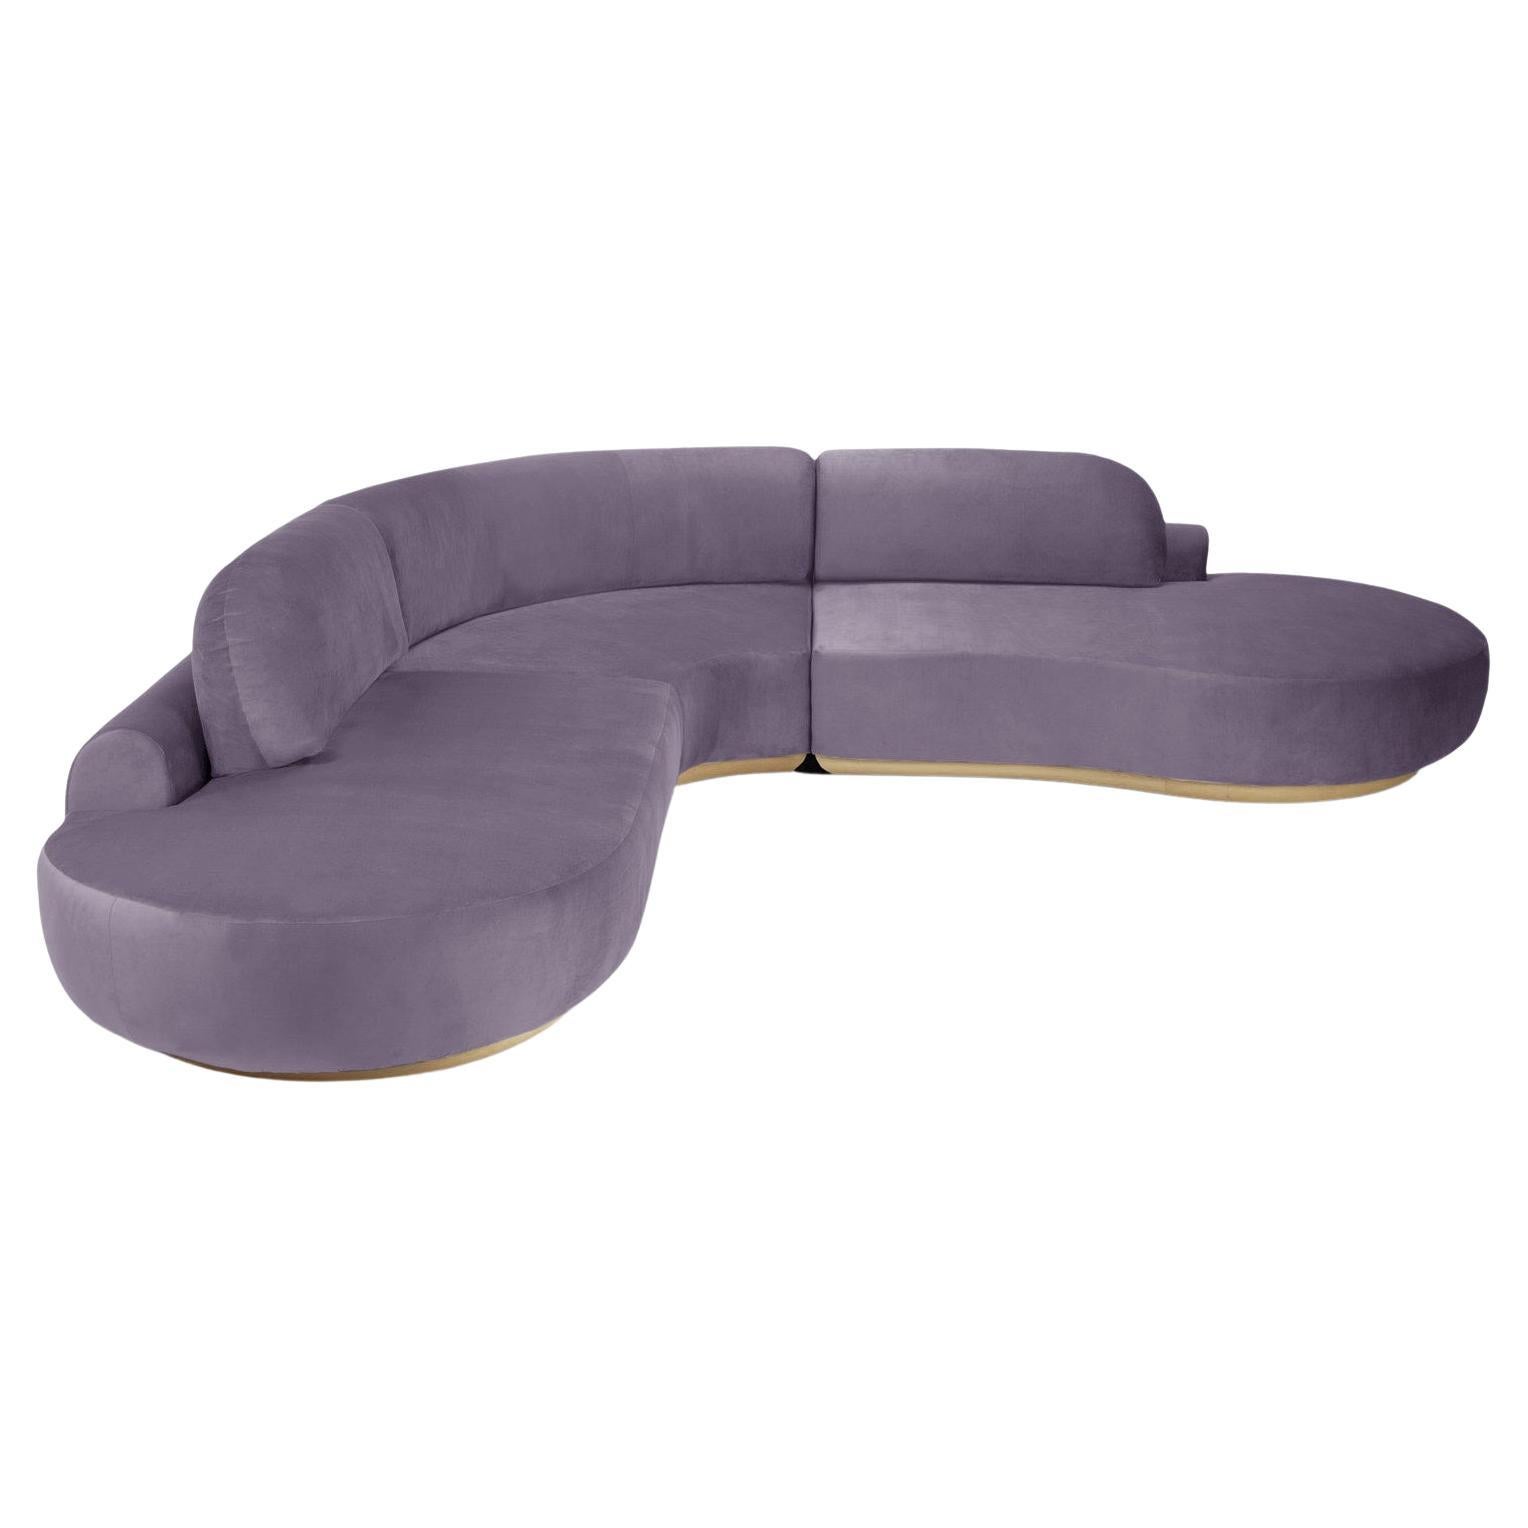 Naked Curved Sectional Sofa, 3 Piece with Natural Oak and Paris Lavanda For Sale